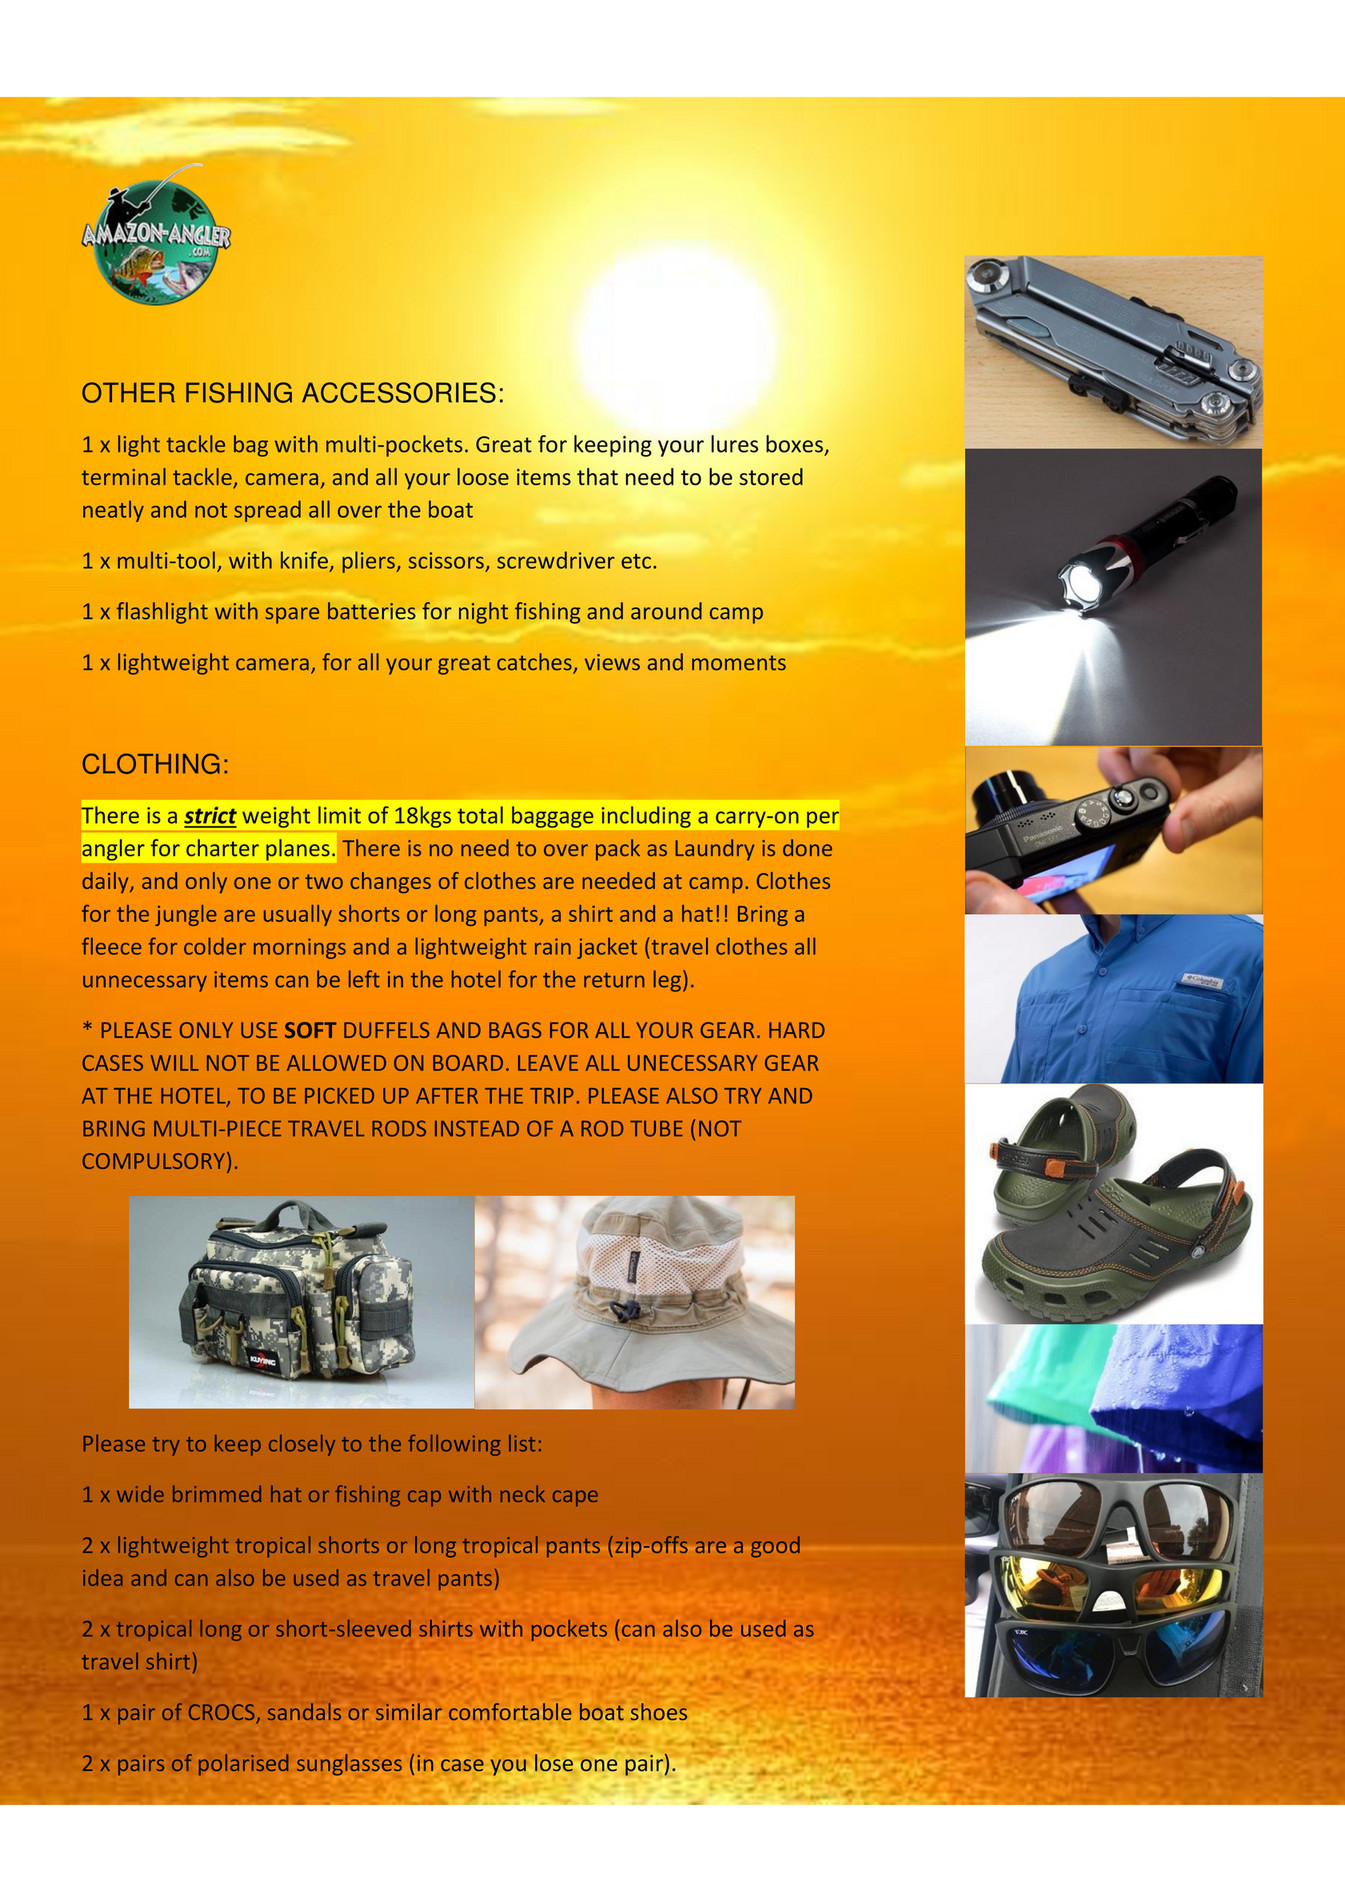 My publications - ARAPAIMA - TACKLE TALK, GEAR AND ACCESSORIES - Page 1 -  Created with Publitas.com